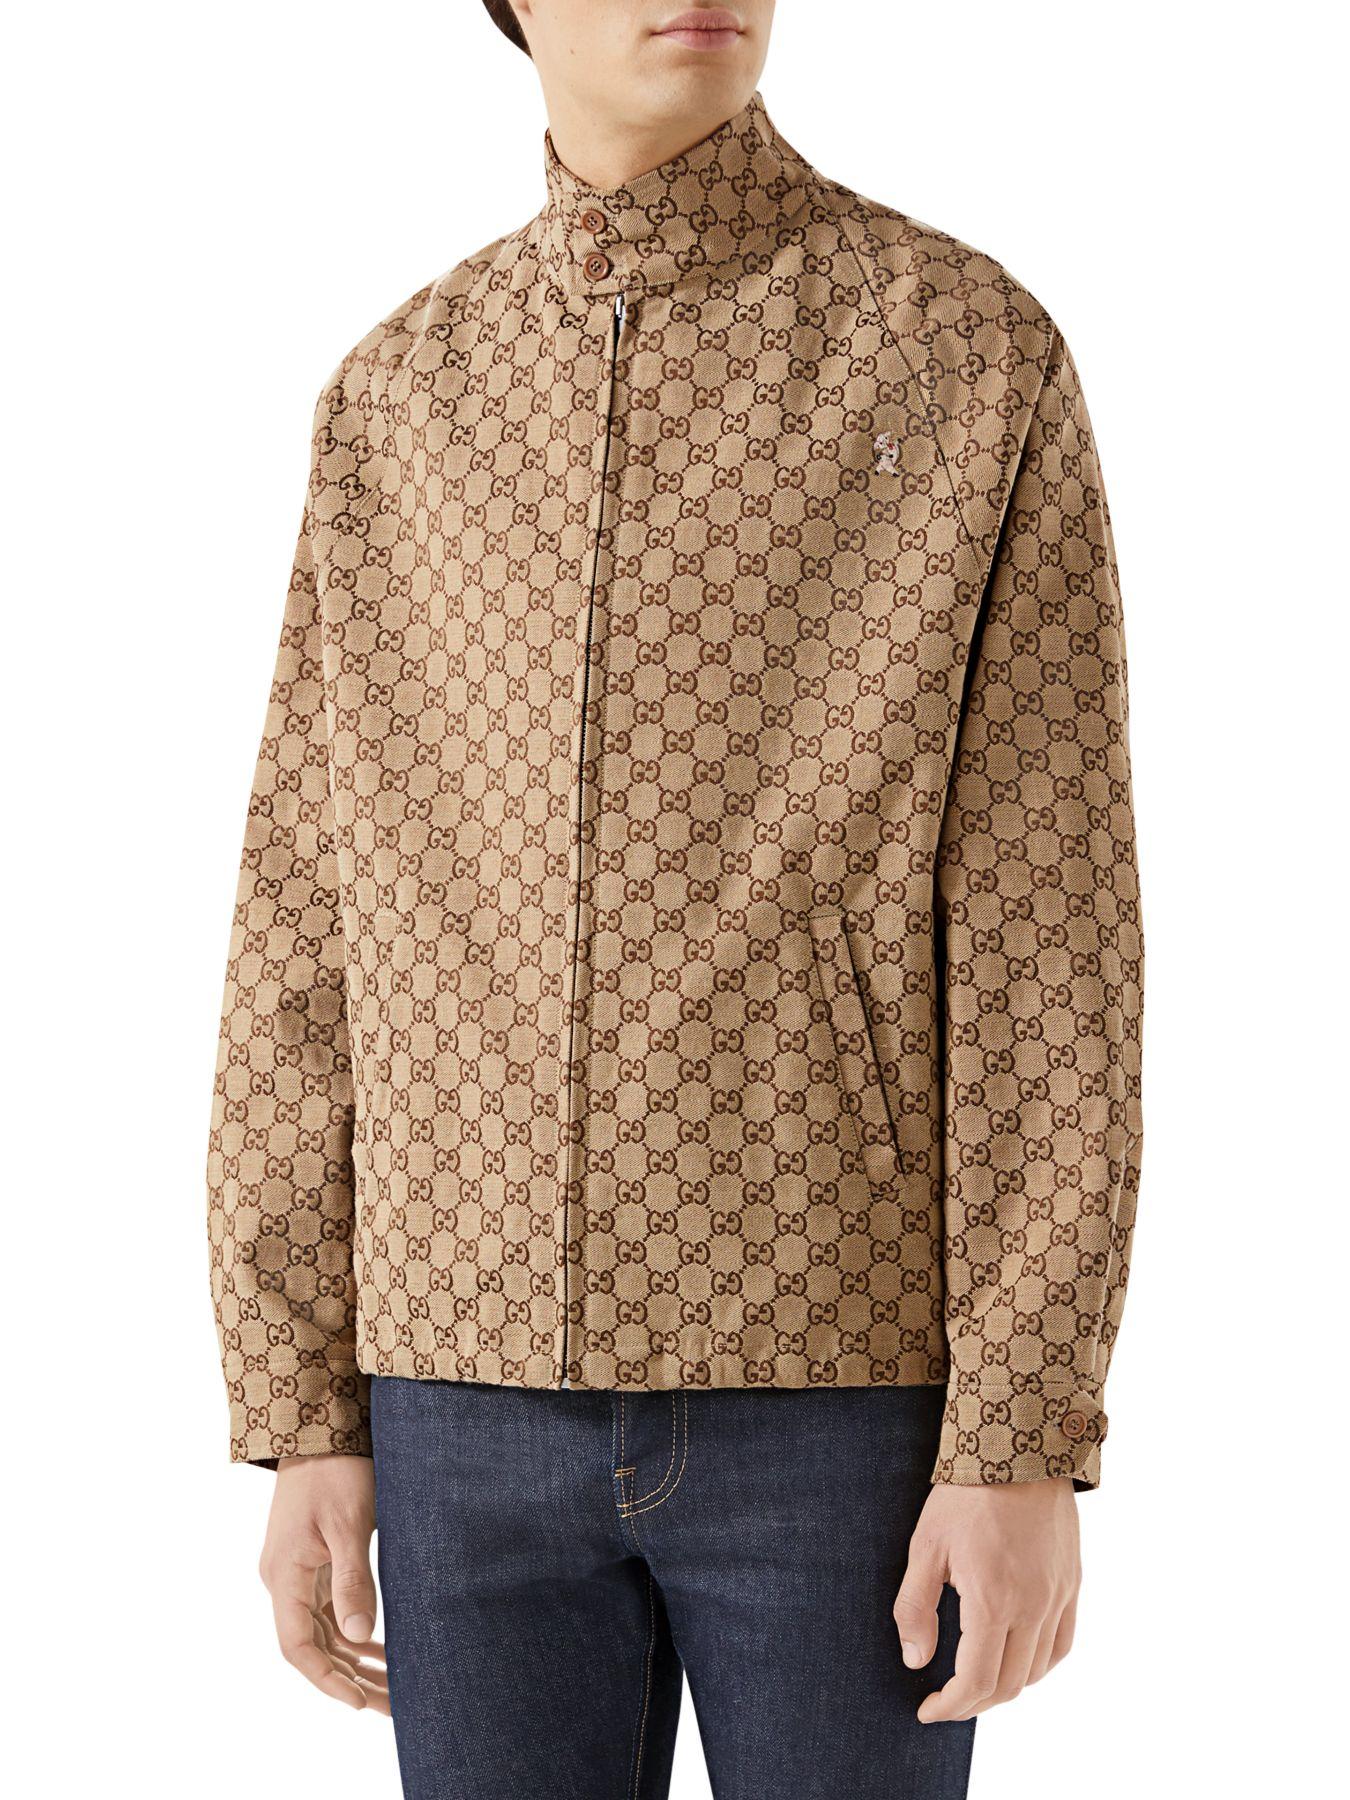 Gucci Gg-jacquard Canvas Bomber Jacket in Natural for Men | Lyst